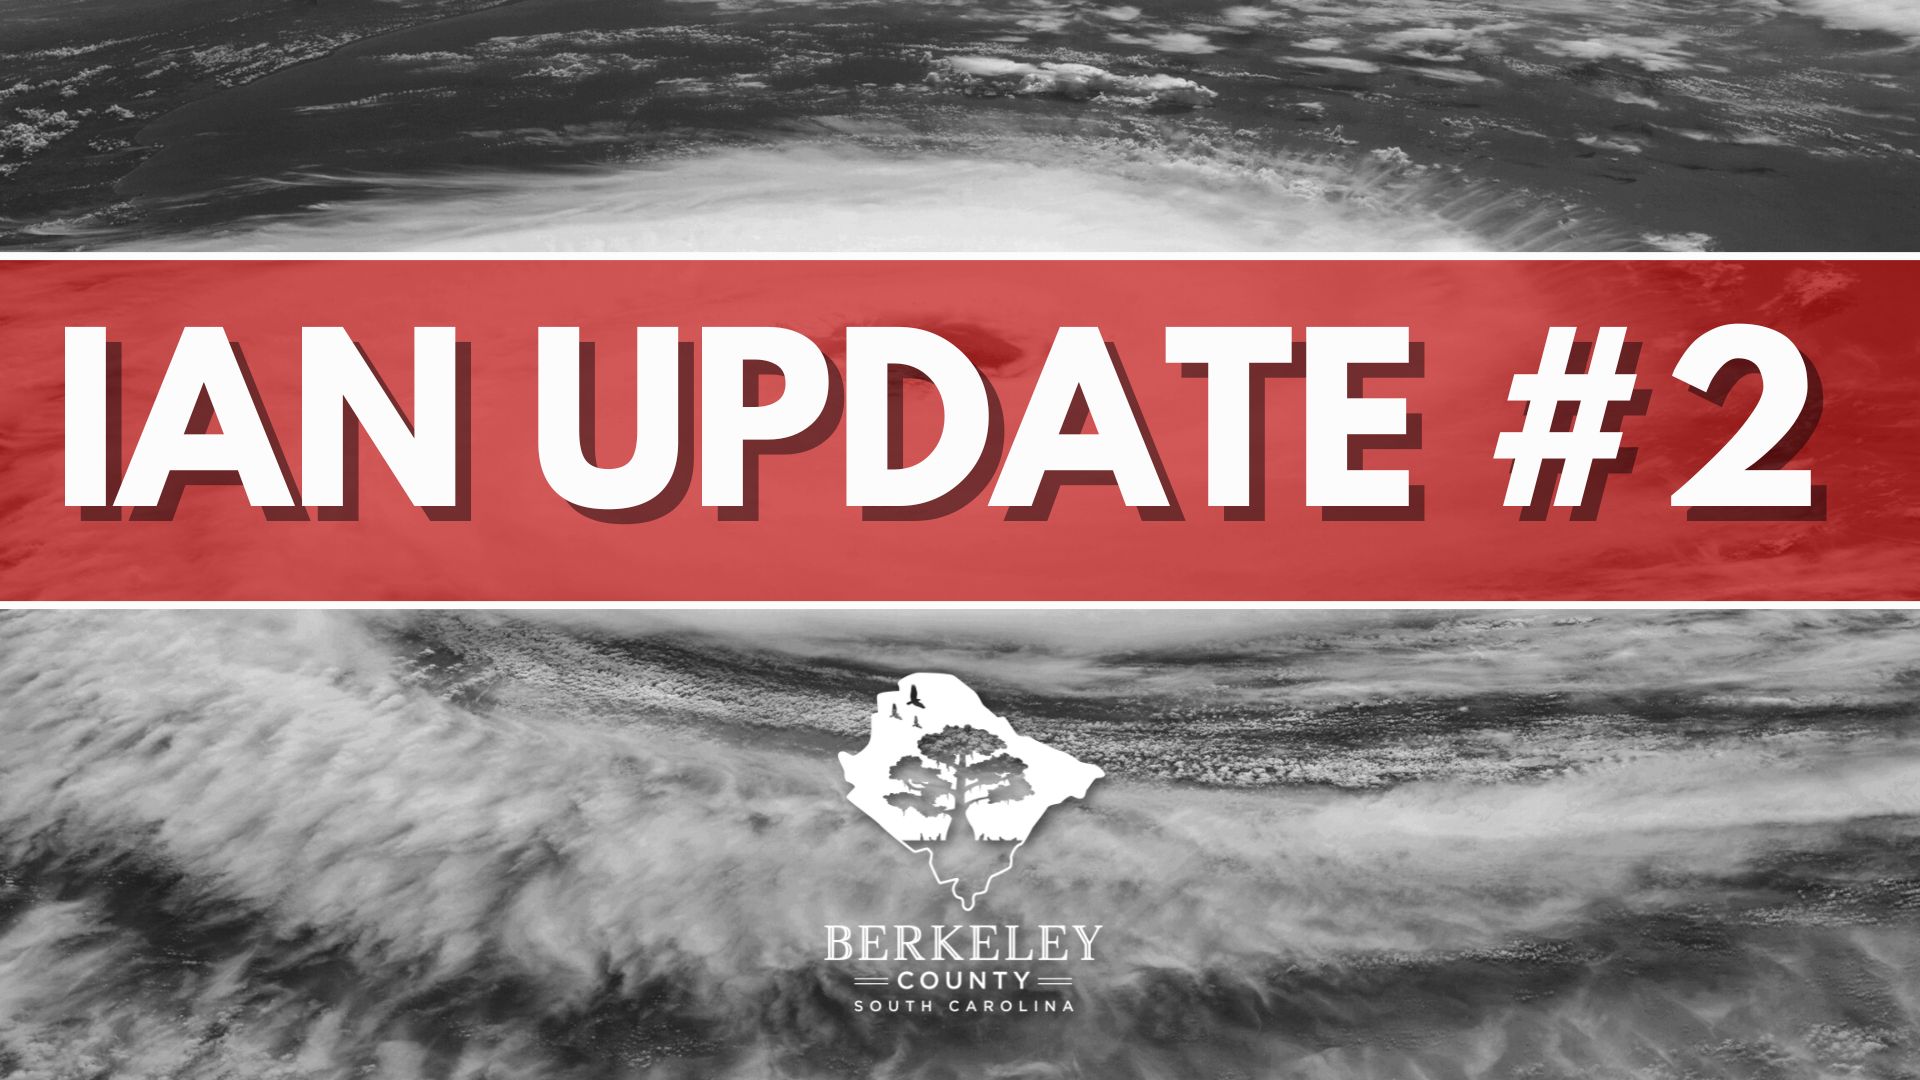 Berkeley County Government Announces Office Closures Ahead of Hurricane Ian